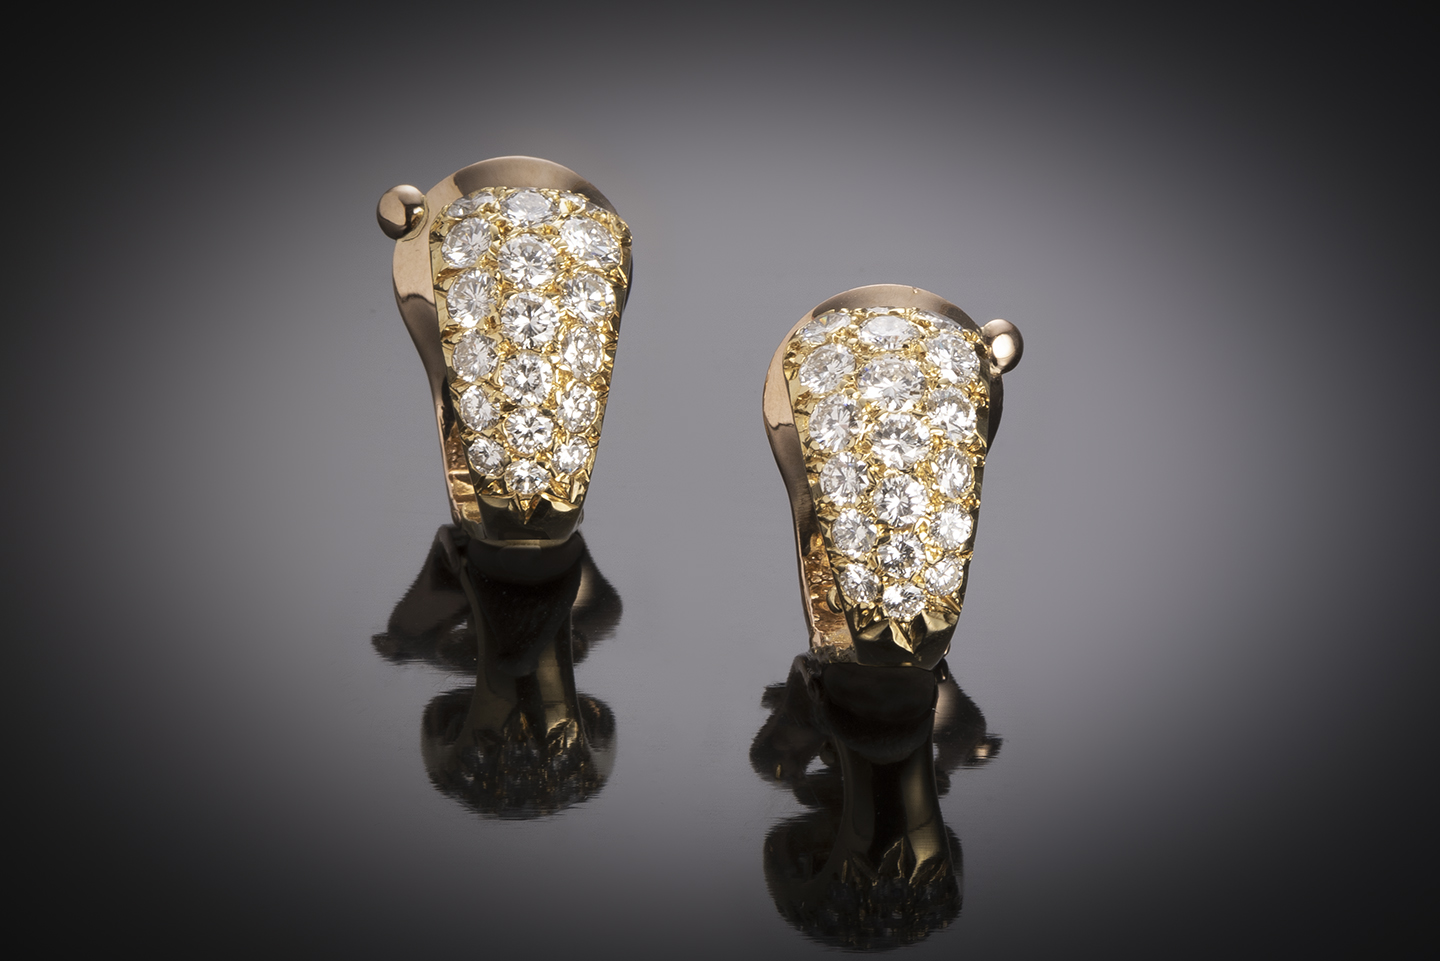 French Van Cleef & Arpels earrings (signed and numbered) diamonds (2 carats) circa 1960, hallmark: A. Vassort-1